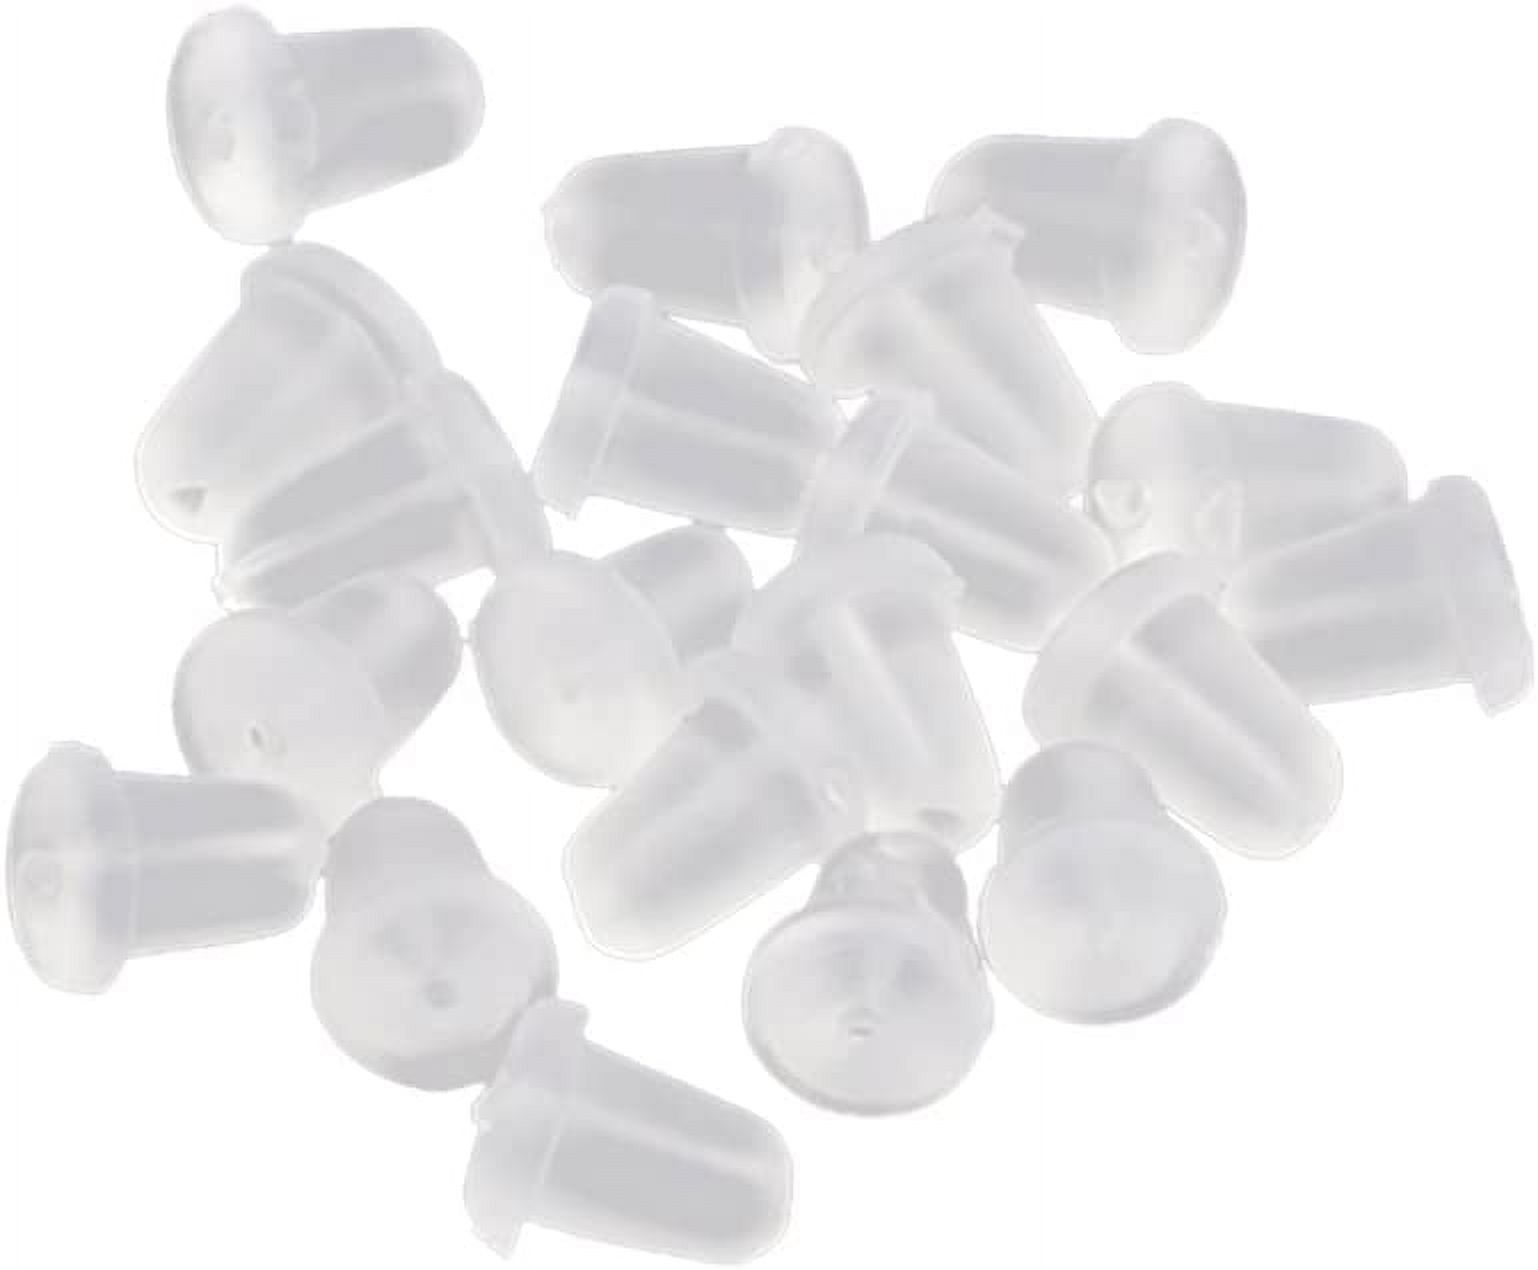 1000 Pcs Clear Earring Backs Safety Silicone Earring Clutch Earring Pads Earrings Jewelry Accessories for Women - image 1 of 5